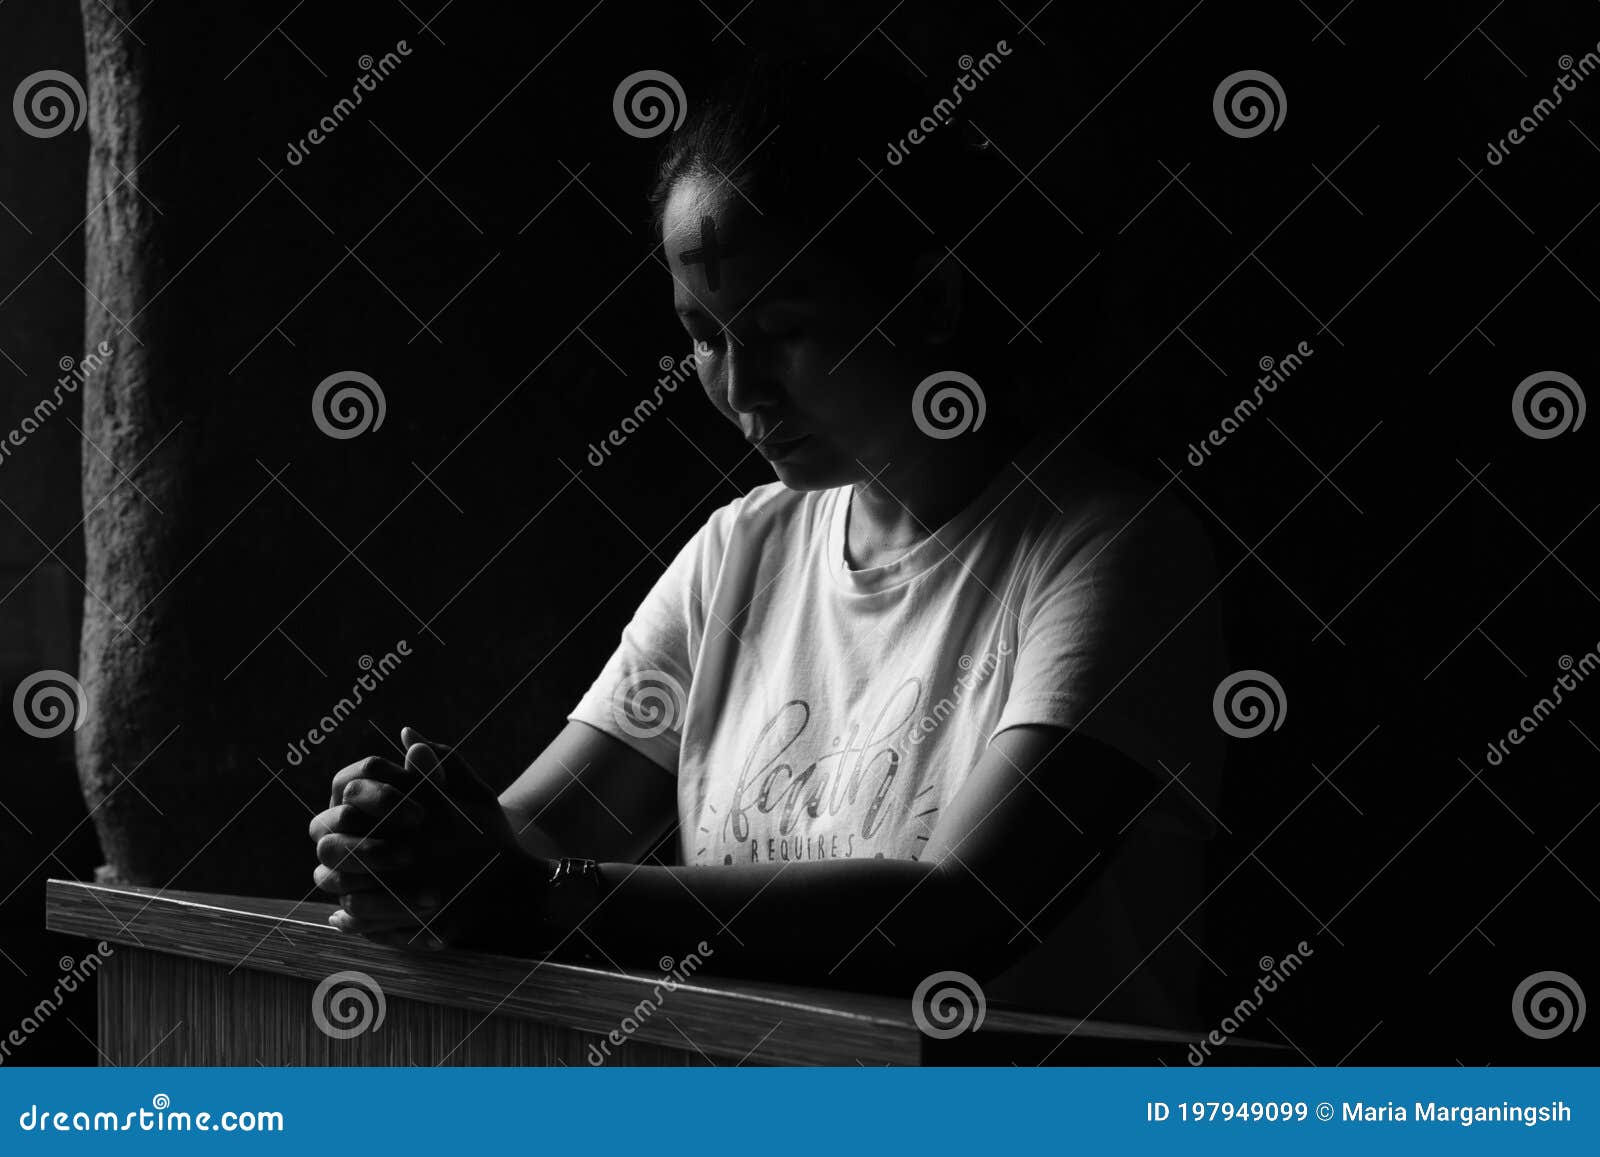 portrait of young woman kneeling and praying in silent prayer pose, on black and white background. ash wednesday concept.